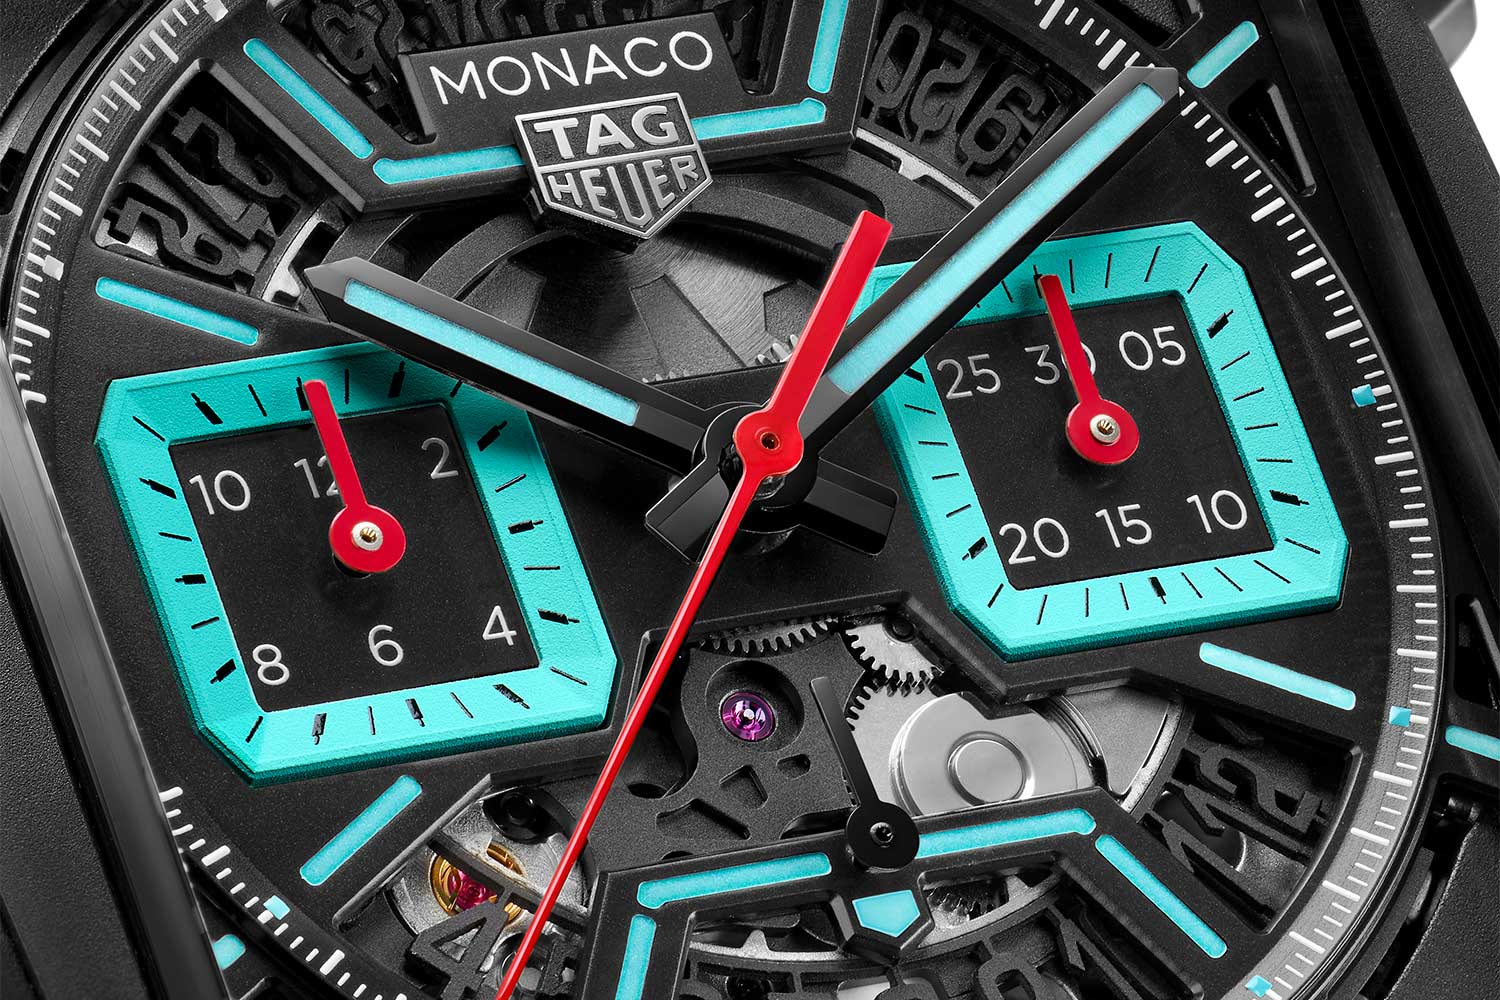 Closed up of TAG Heuer Monaco Skeleton in turquoise dial